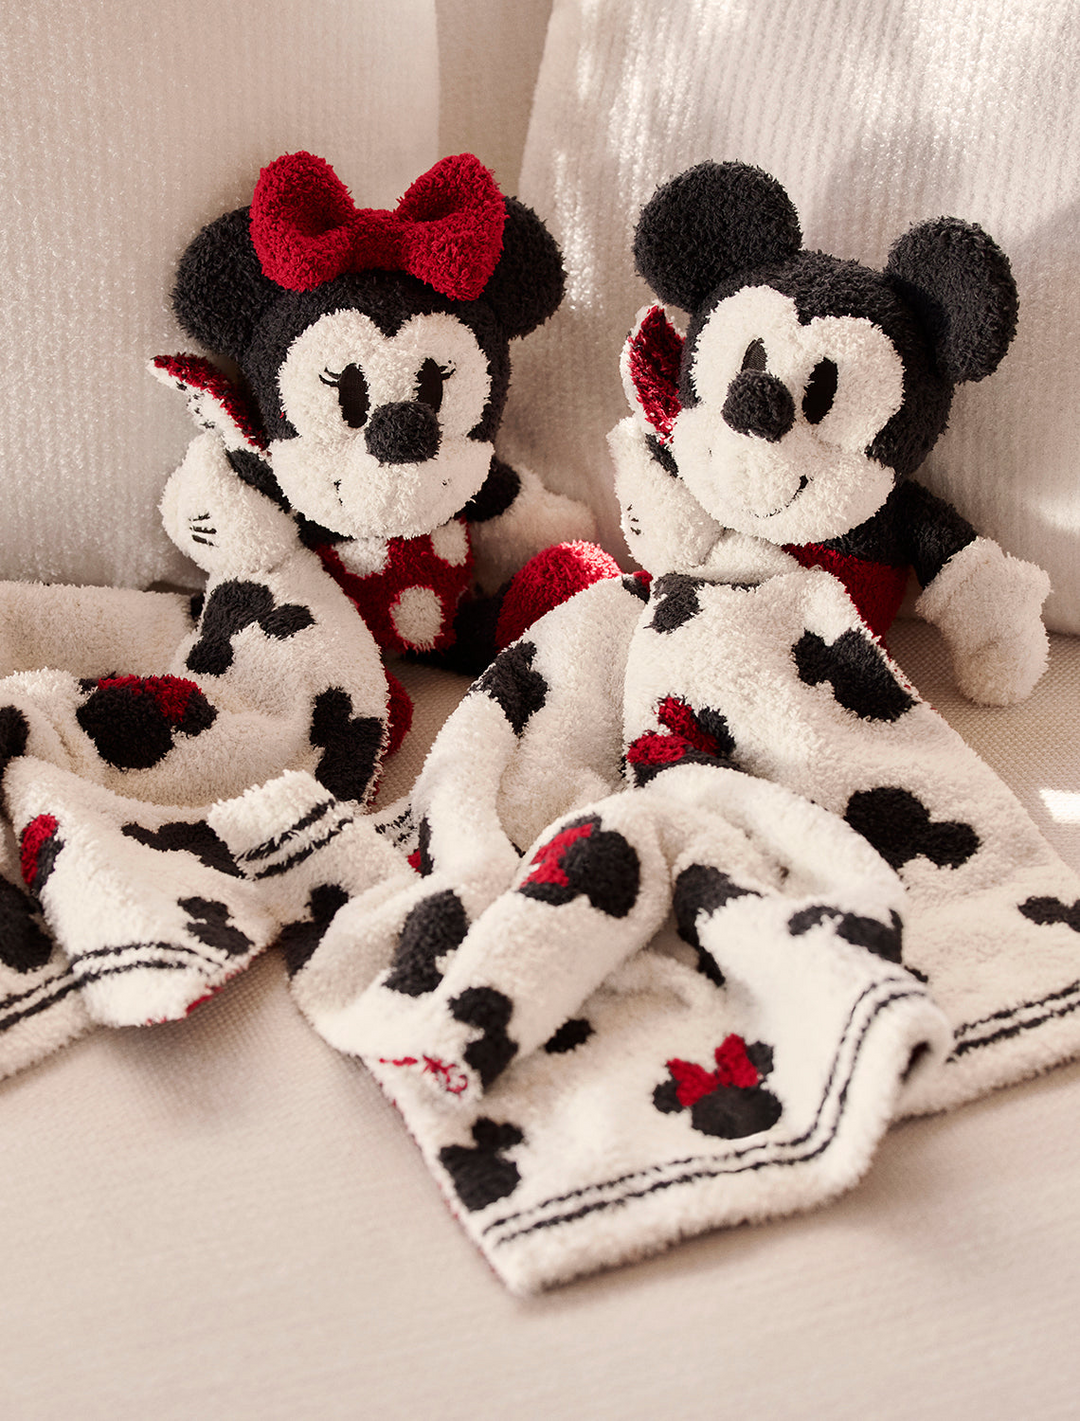 COZY CHIC MICKEY MOUSE BUDDY BLANKET-CREAM MULTI - Kingfisher Road - Online Boutique